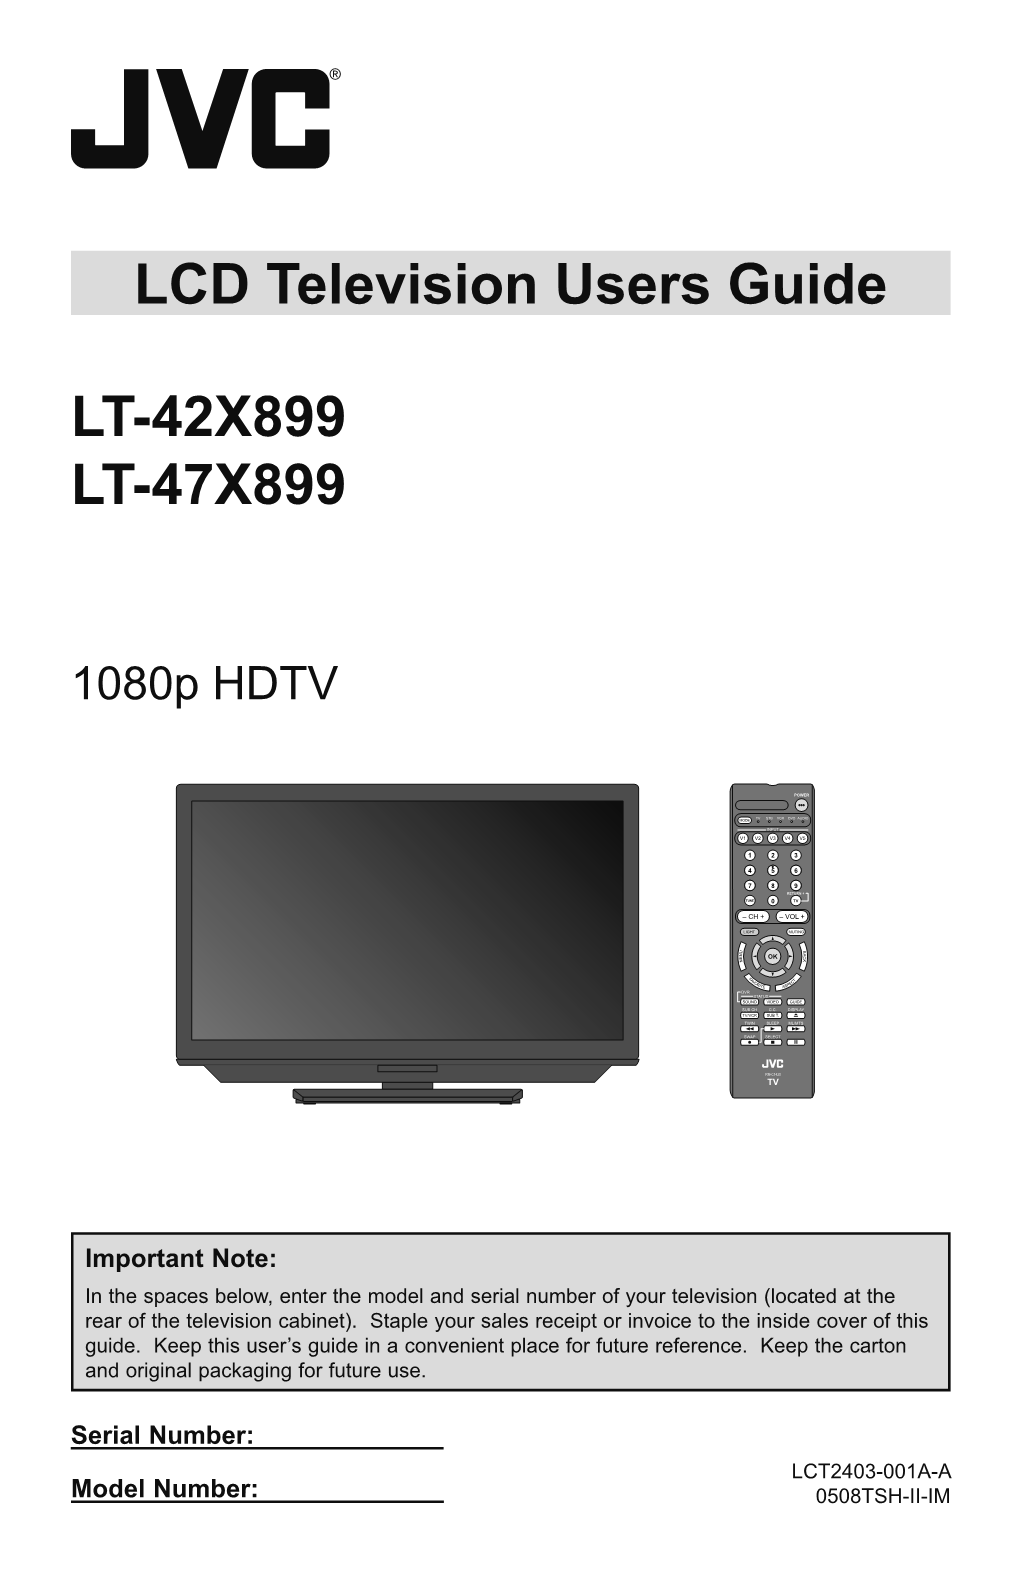 LCD Television Users Guide LT-42X899 LT-47X899